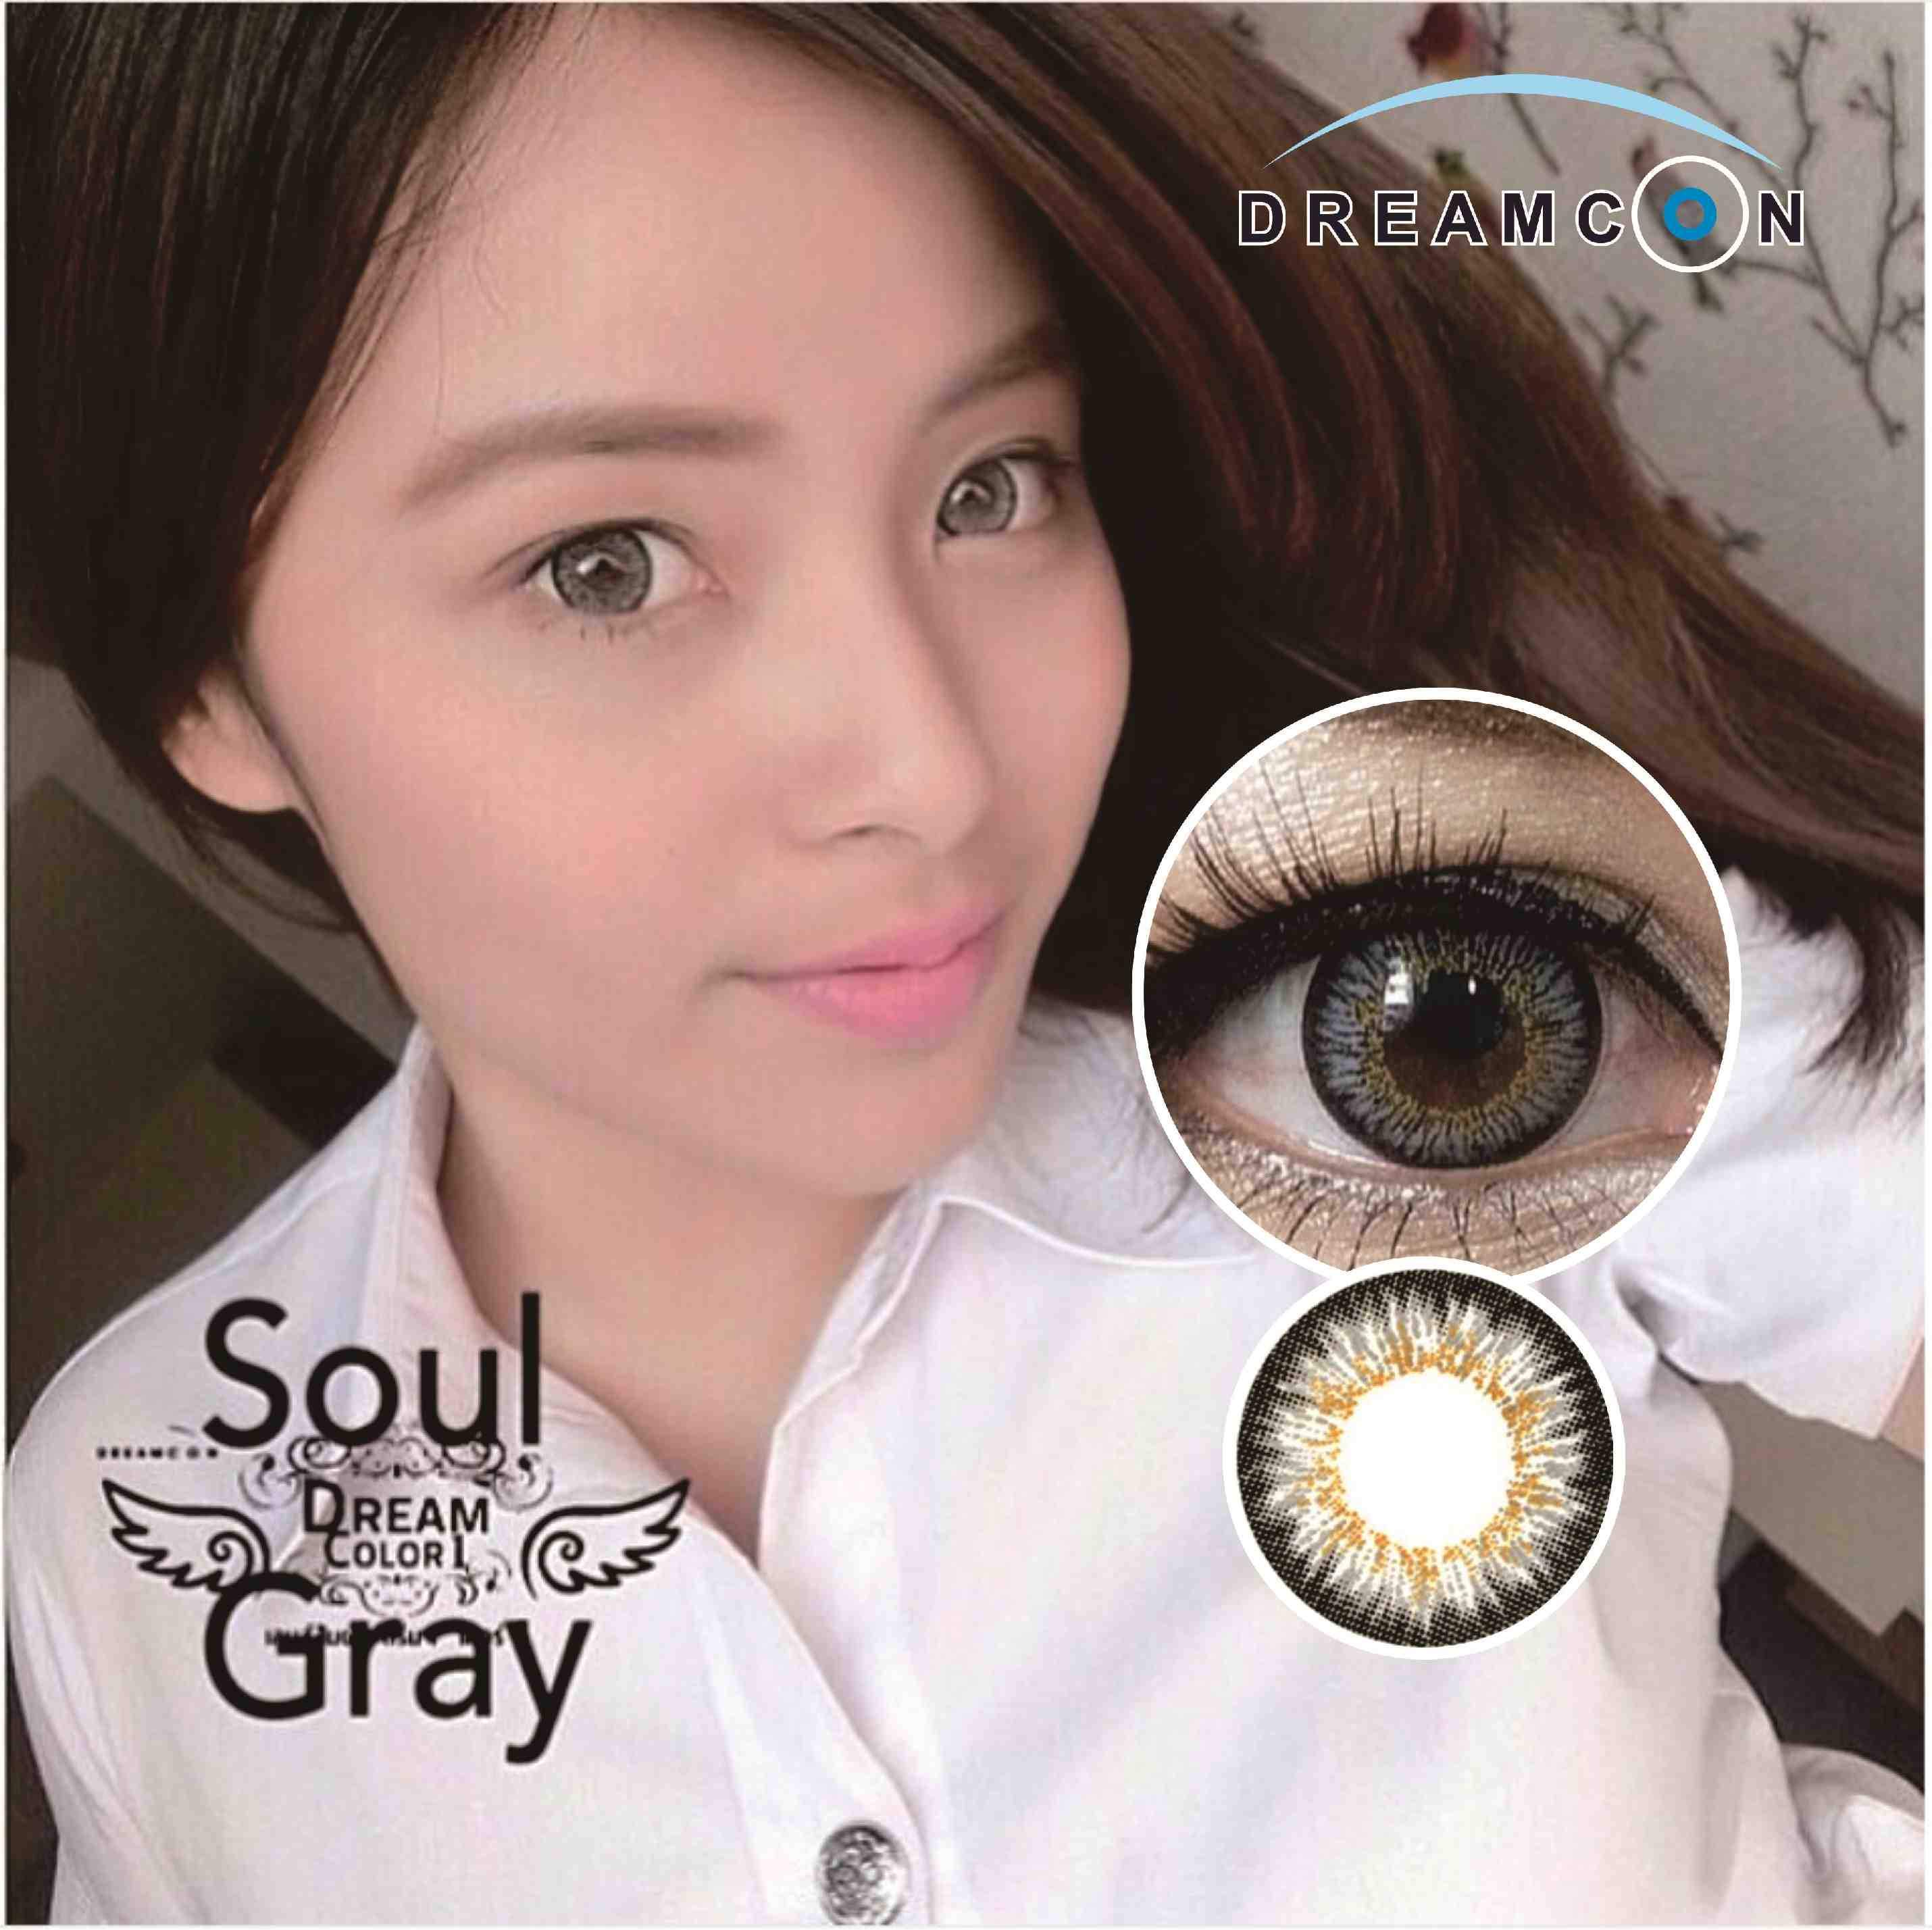 COLORED CONTACTS DREAM COLOR SOUL GRAY - Lens Beauty Queen